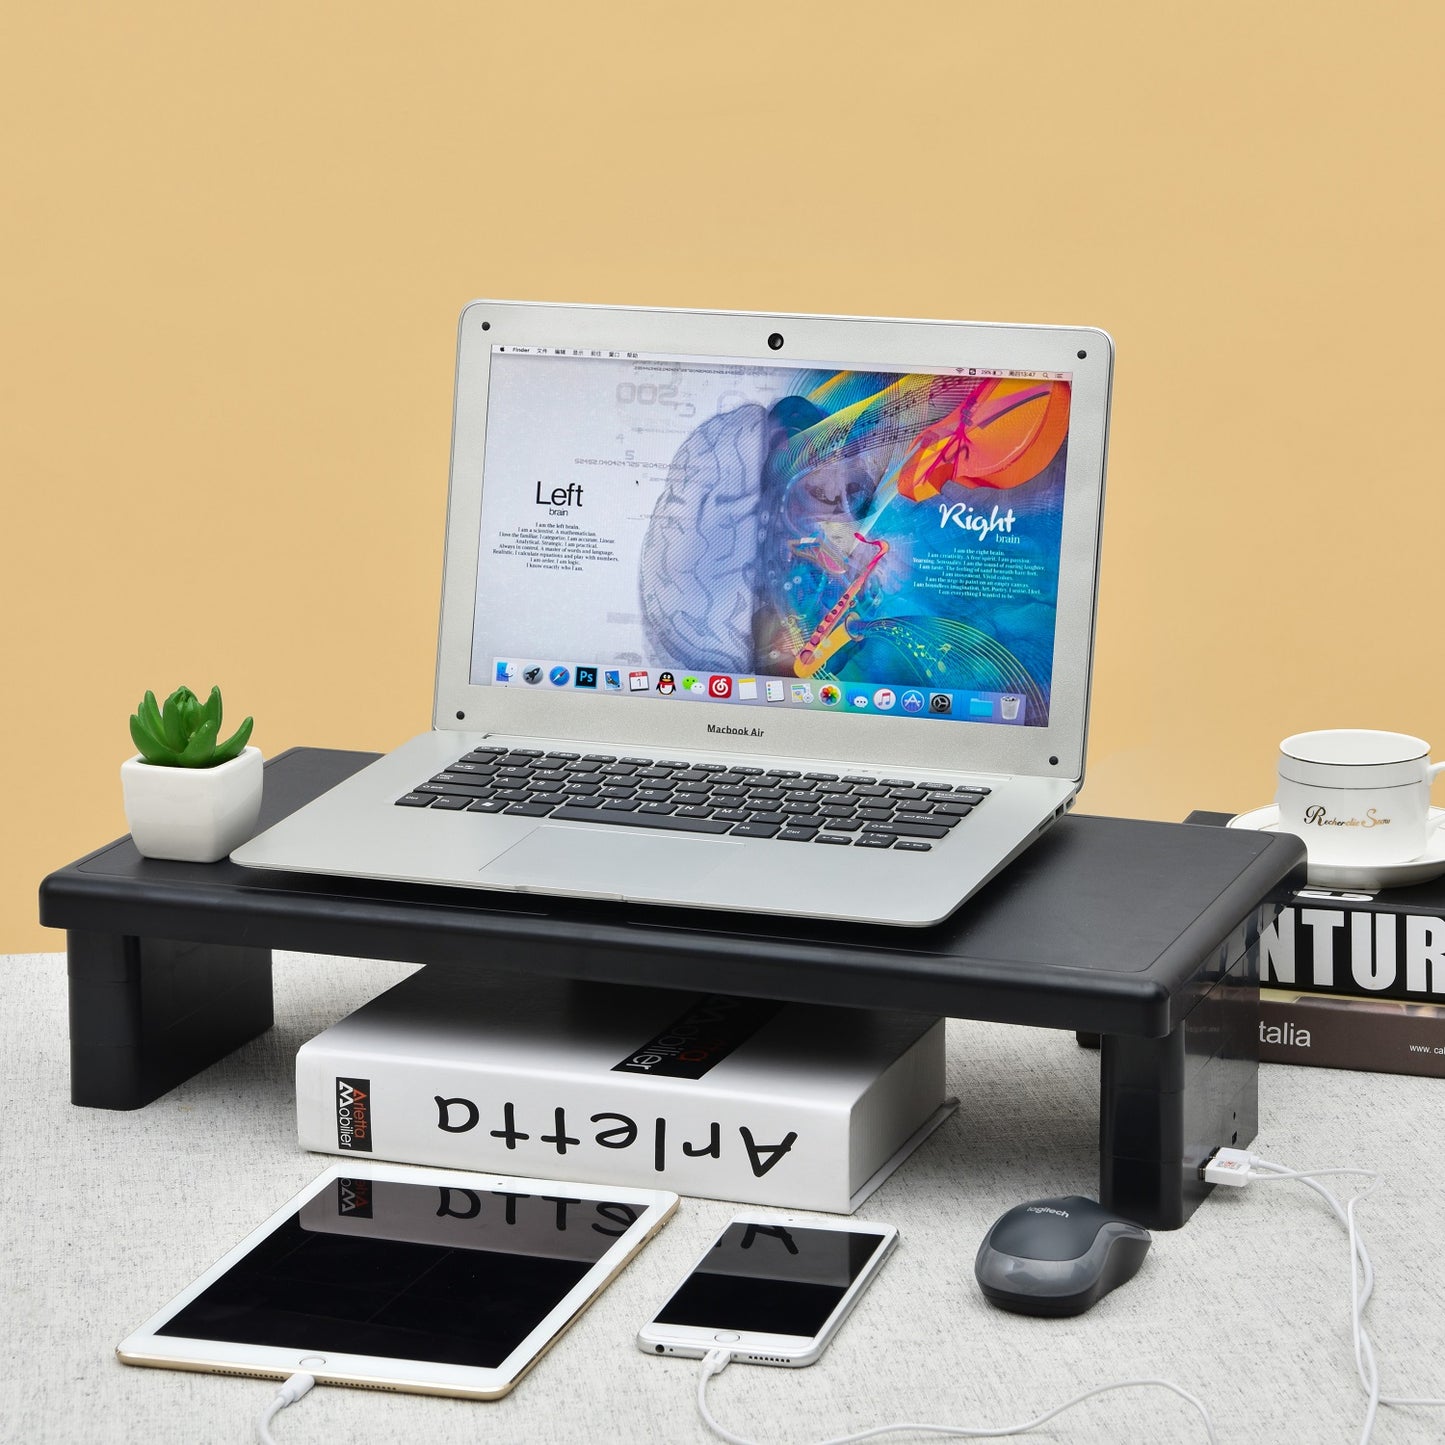 DAC® Stax™  MP-212 Height-Adjustable Ultra-Wide Monitor/Laptop Stand with 2-USB Ports, Black